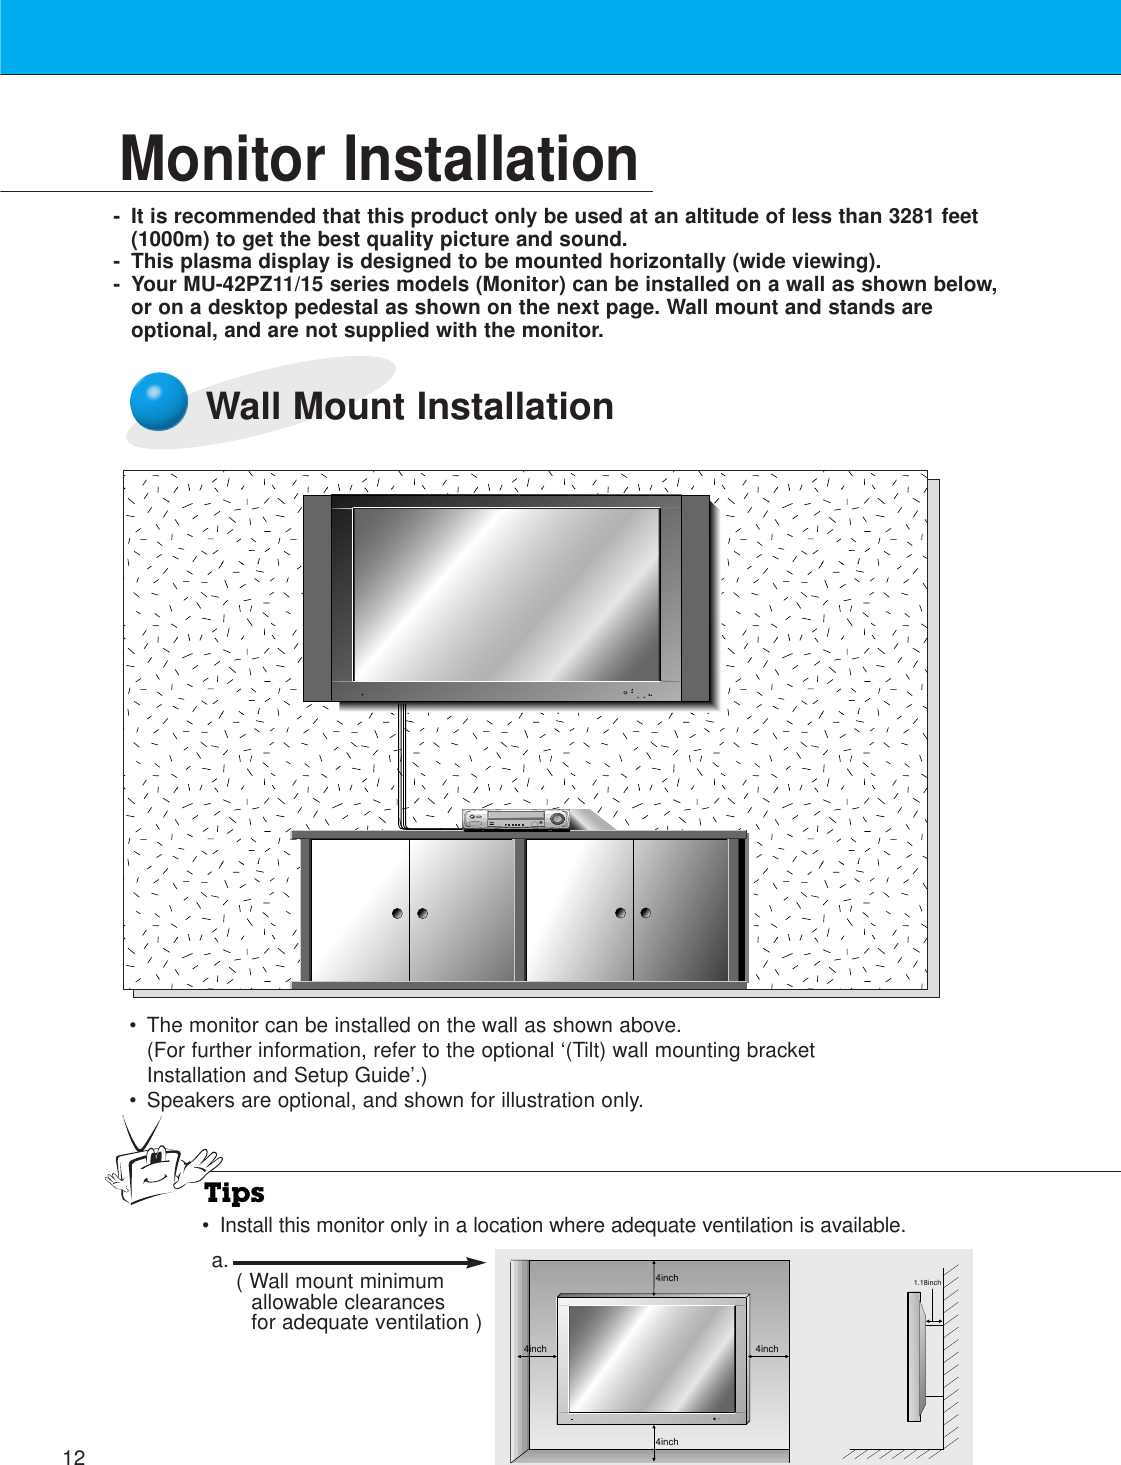 12Monitor Installation- It is recommended that this product only be used at an altitude of less than 3281 feet(1000m) to get the best quality picture and sound.- This plasma display is designed to be mounted horizontally (wide viewing).- Your MU-42PZ11/15 series models (Monitor) can be installed on a wall as shown below,or on a desktop pedestal as shown on the next page. Wall mount and stands areoptional, and are not supplied with the monitor.Wall Mount Installation• The monitor can be installed on the wall as shown above.(For further information, refer to the optional ‘(Tilt) wall mounting bracketInstallation and Setup Guide’.)• Speakers are optional, and shown for illustration only.Tips•Install this monitor only in a location where adequate ventilation is available.4inch4inch4inch4inch1.18incha. ( Wall mount minimumallowable clearancesfor adequate ventilation )